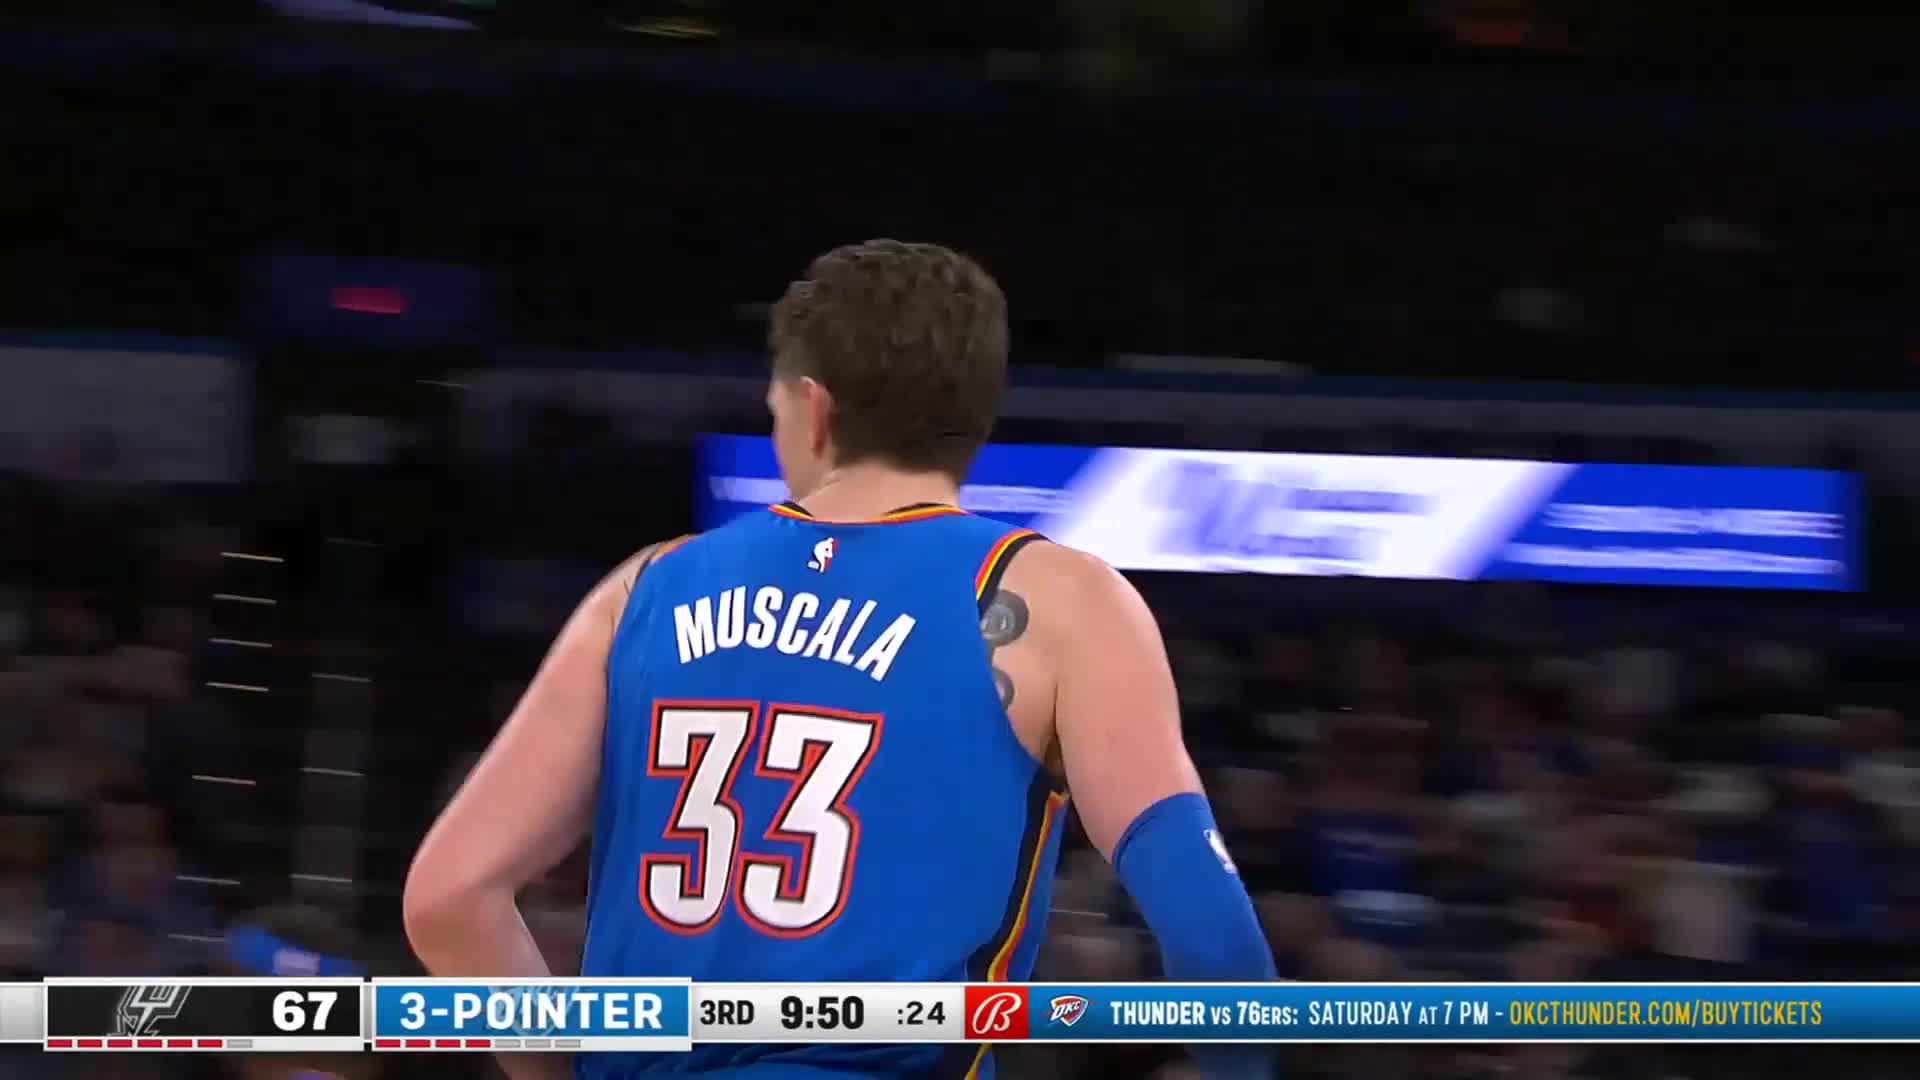 Mike Muscala makes it RAIN! ☂️ Drops 5-6 FG from the bench vs. Spurs 